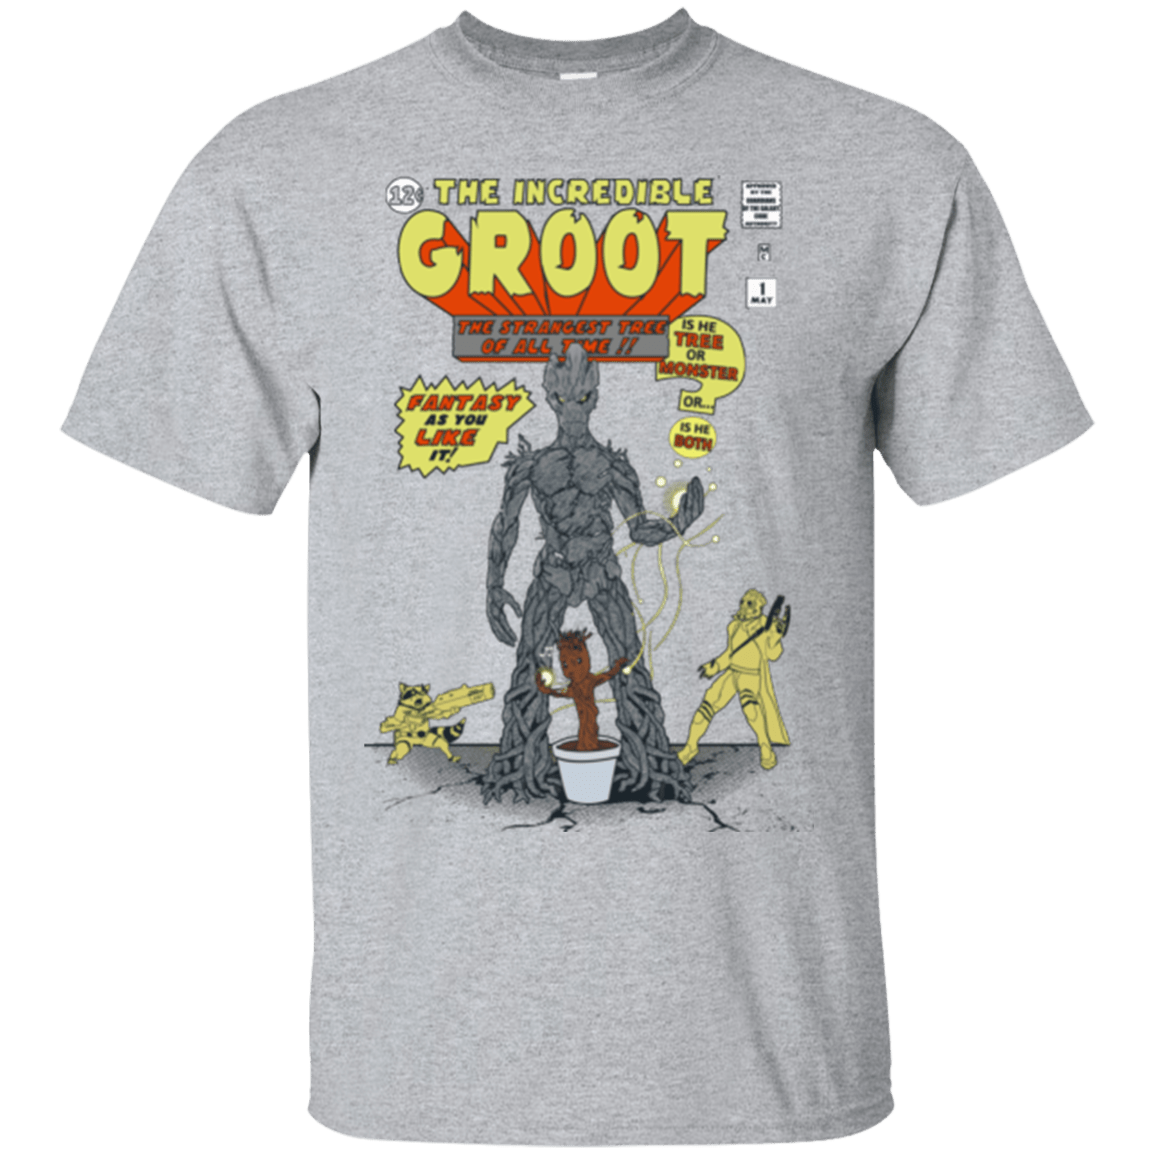 T-Shirts Sport Grey / Small The Incredible Groot T-Shirt